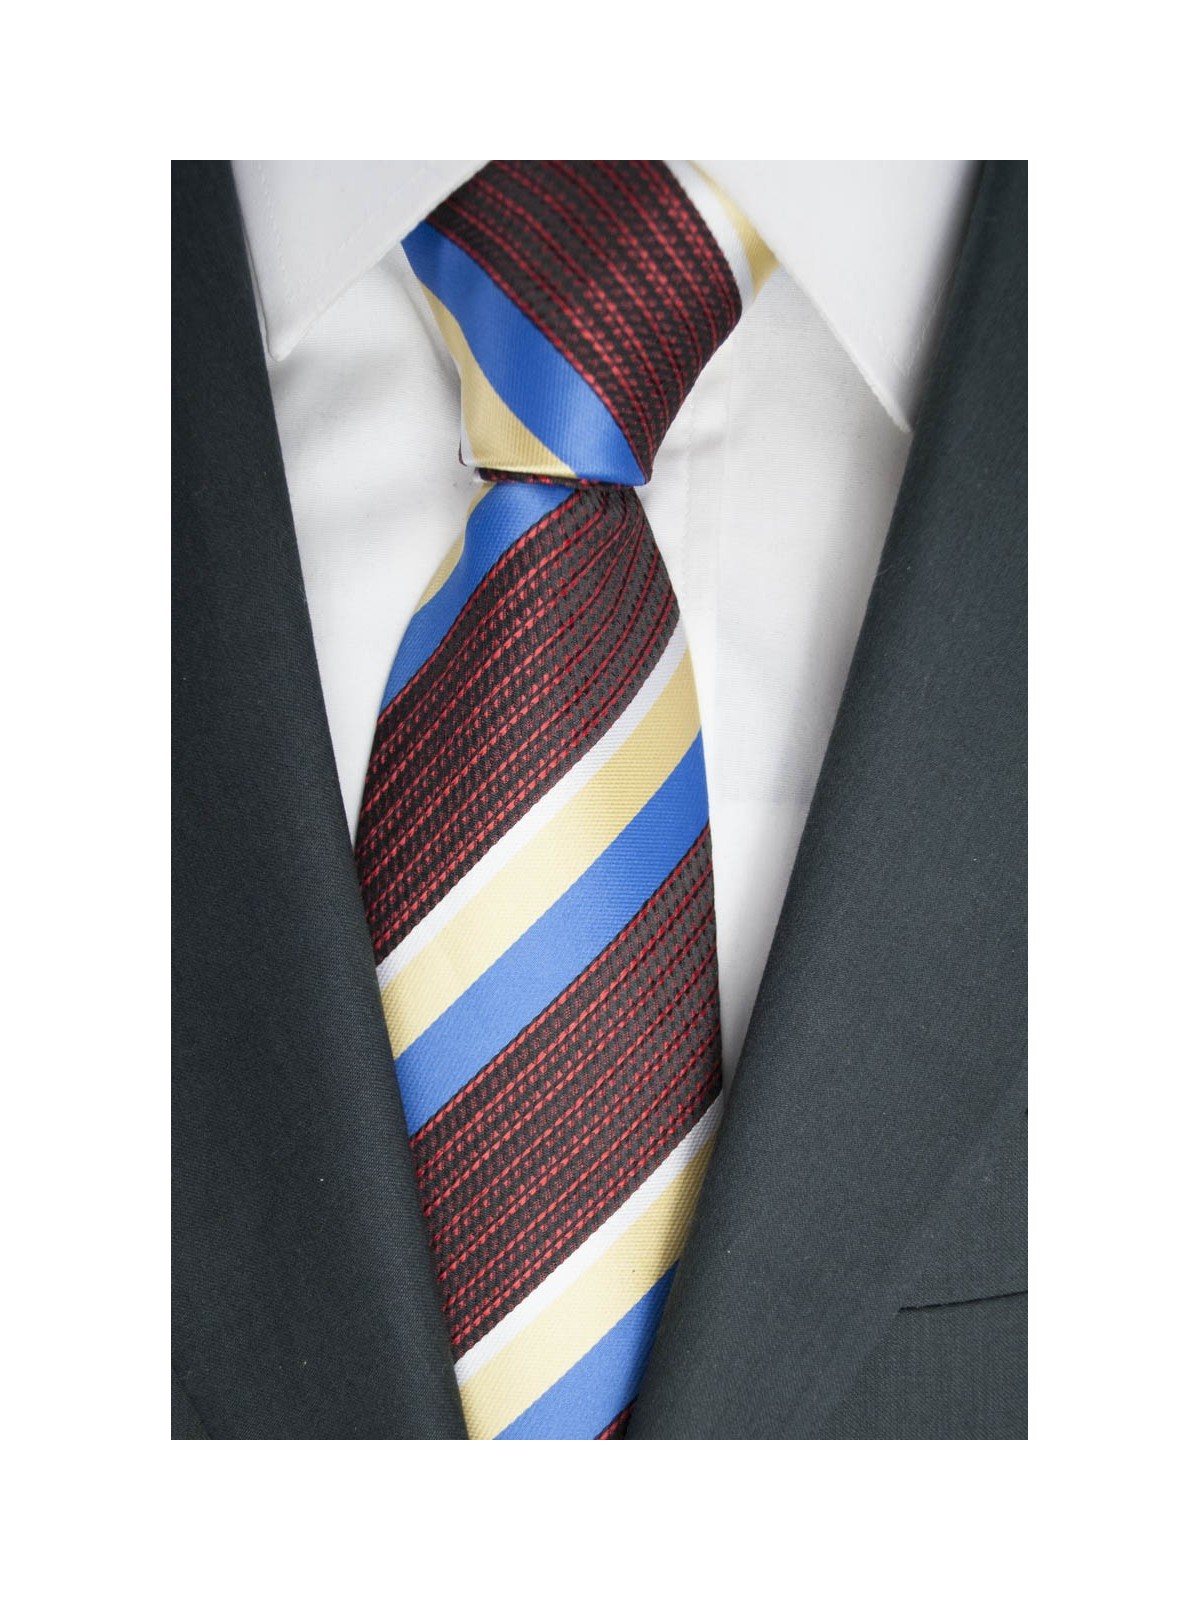 Regimental tie Yellow light blue, Black - Red 100% Pure Silk - Made in Italy